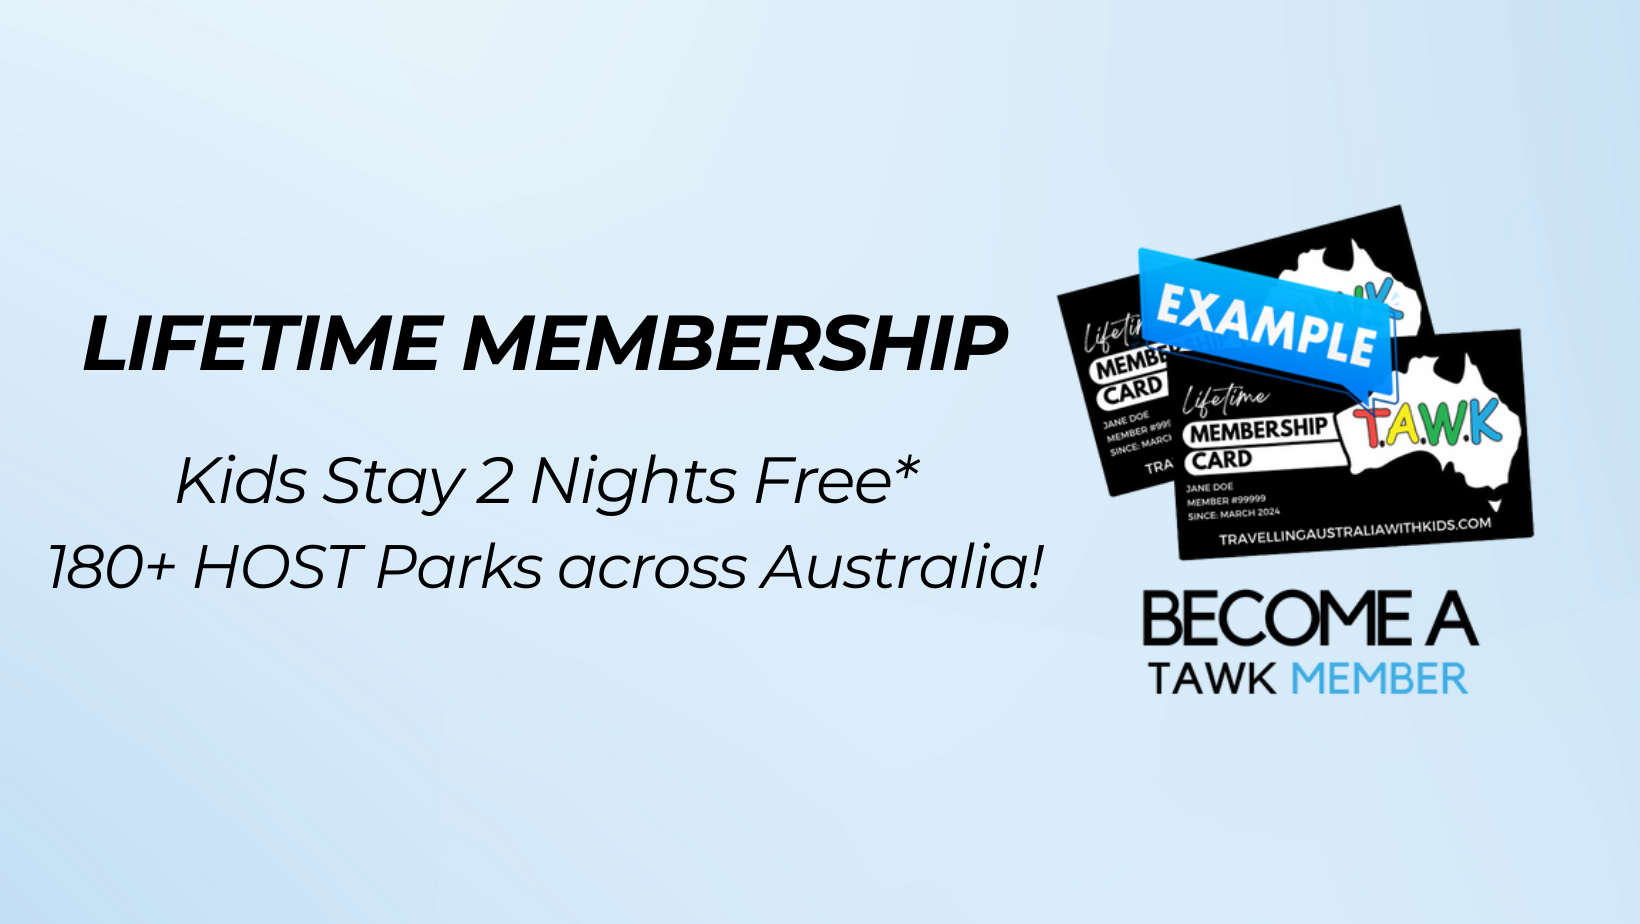 Tawk membership, to caravan parks and camping grounds, discounts and bargains for members